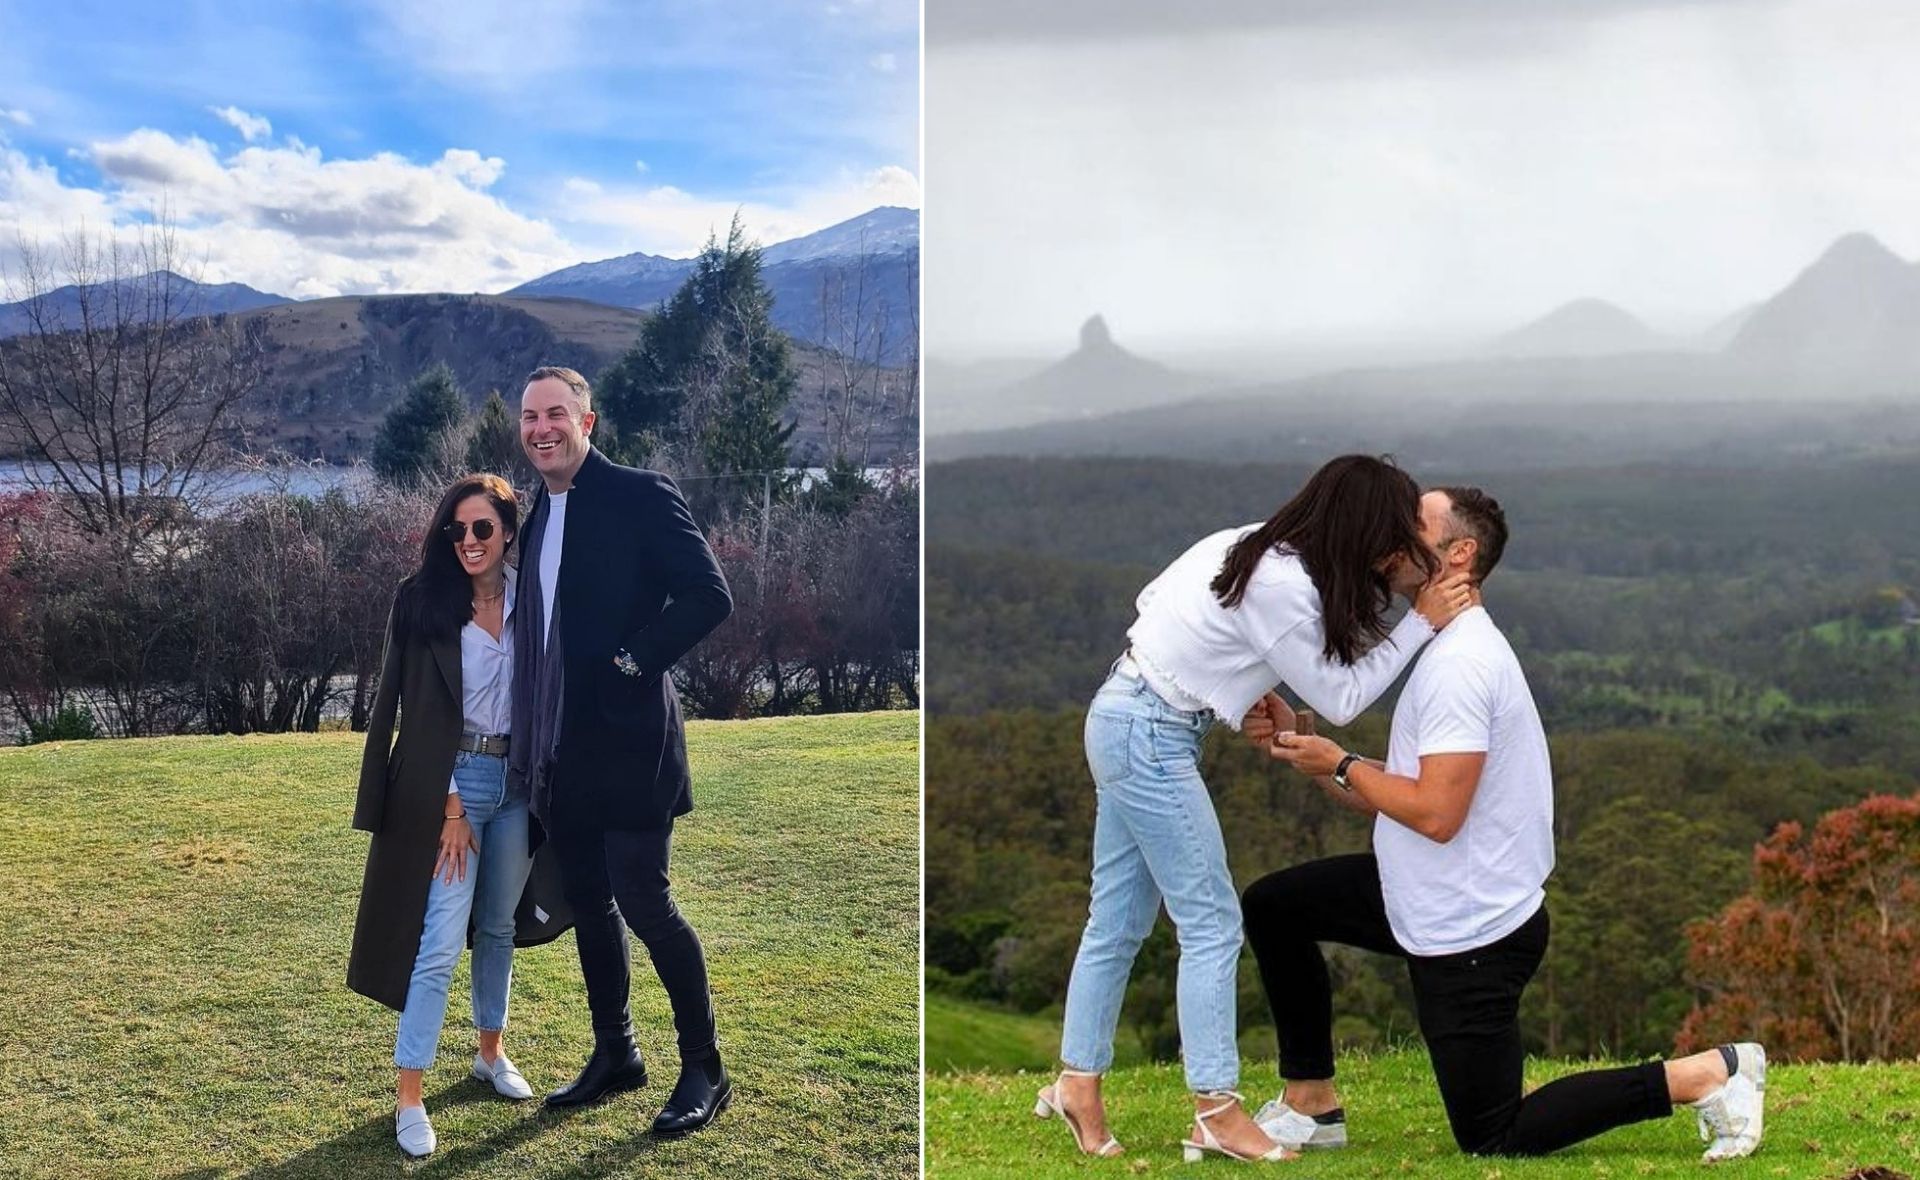 Sam Frost’s Bachelorette ex Sasha Mielczarek has announced he’s engaged to his girlfriend Carly Cottam